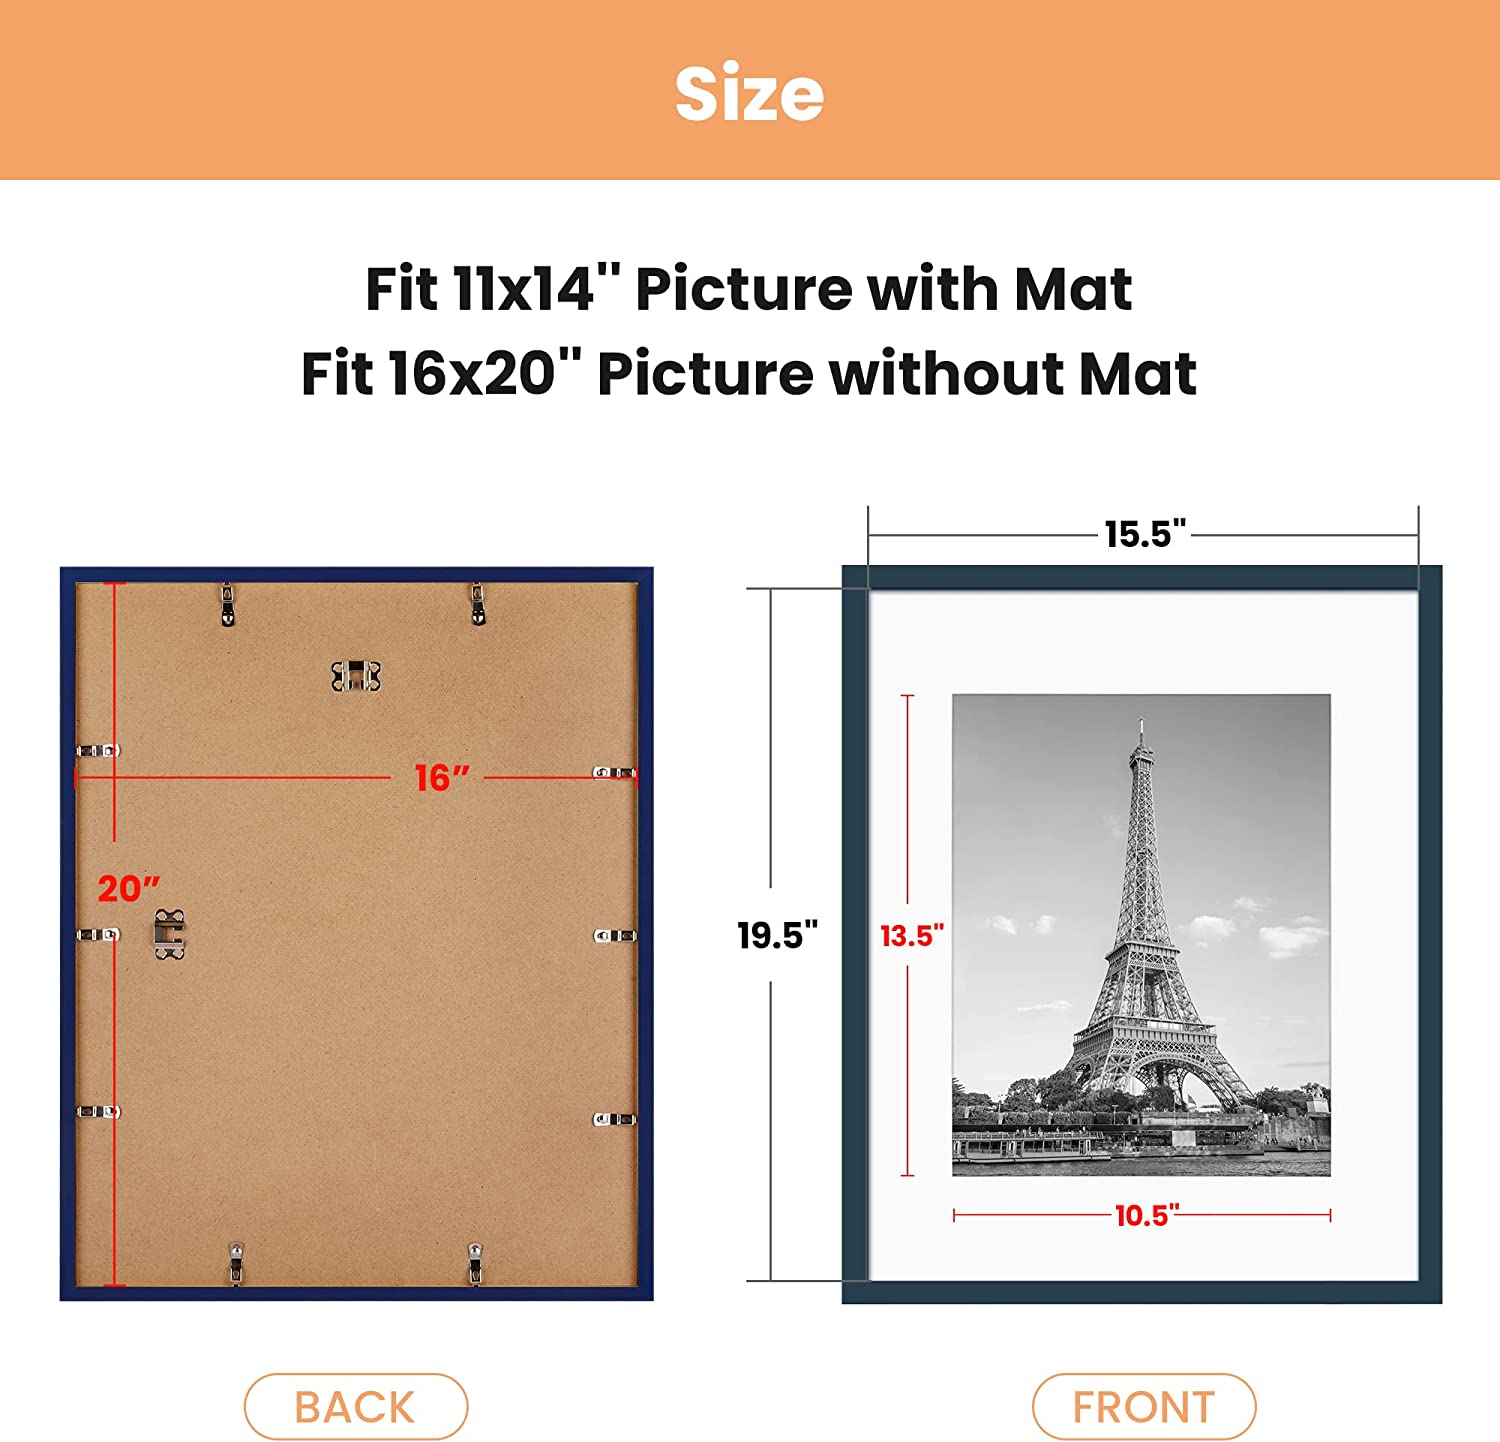 upsimples 16x20 Picture Frame Set of 5, Display Pictures 11x14